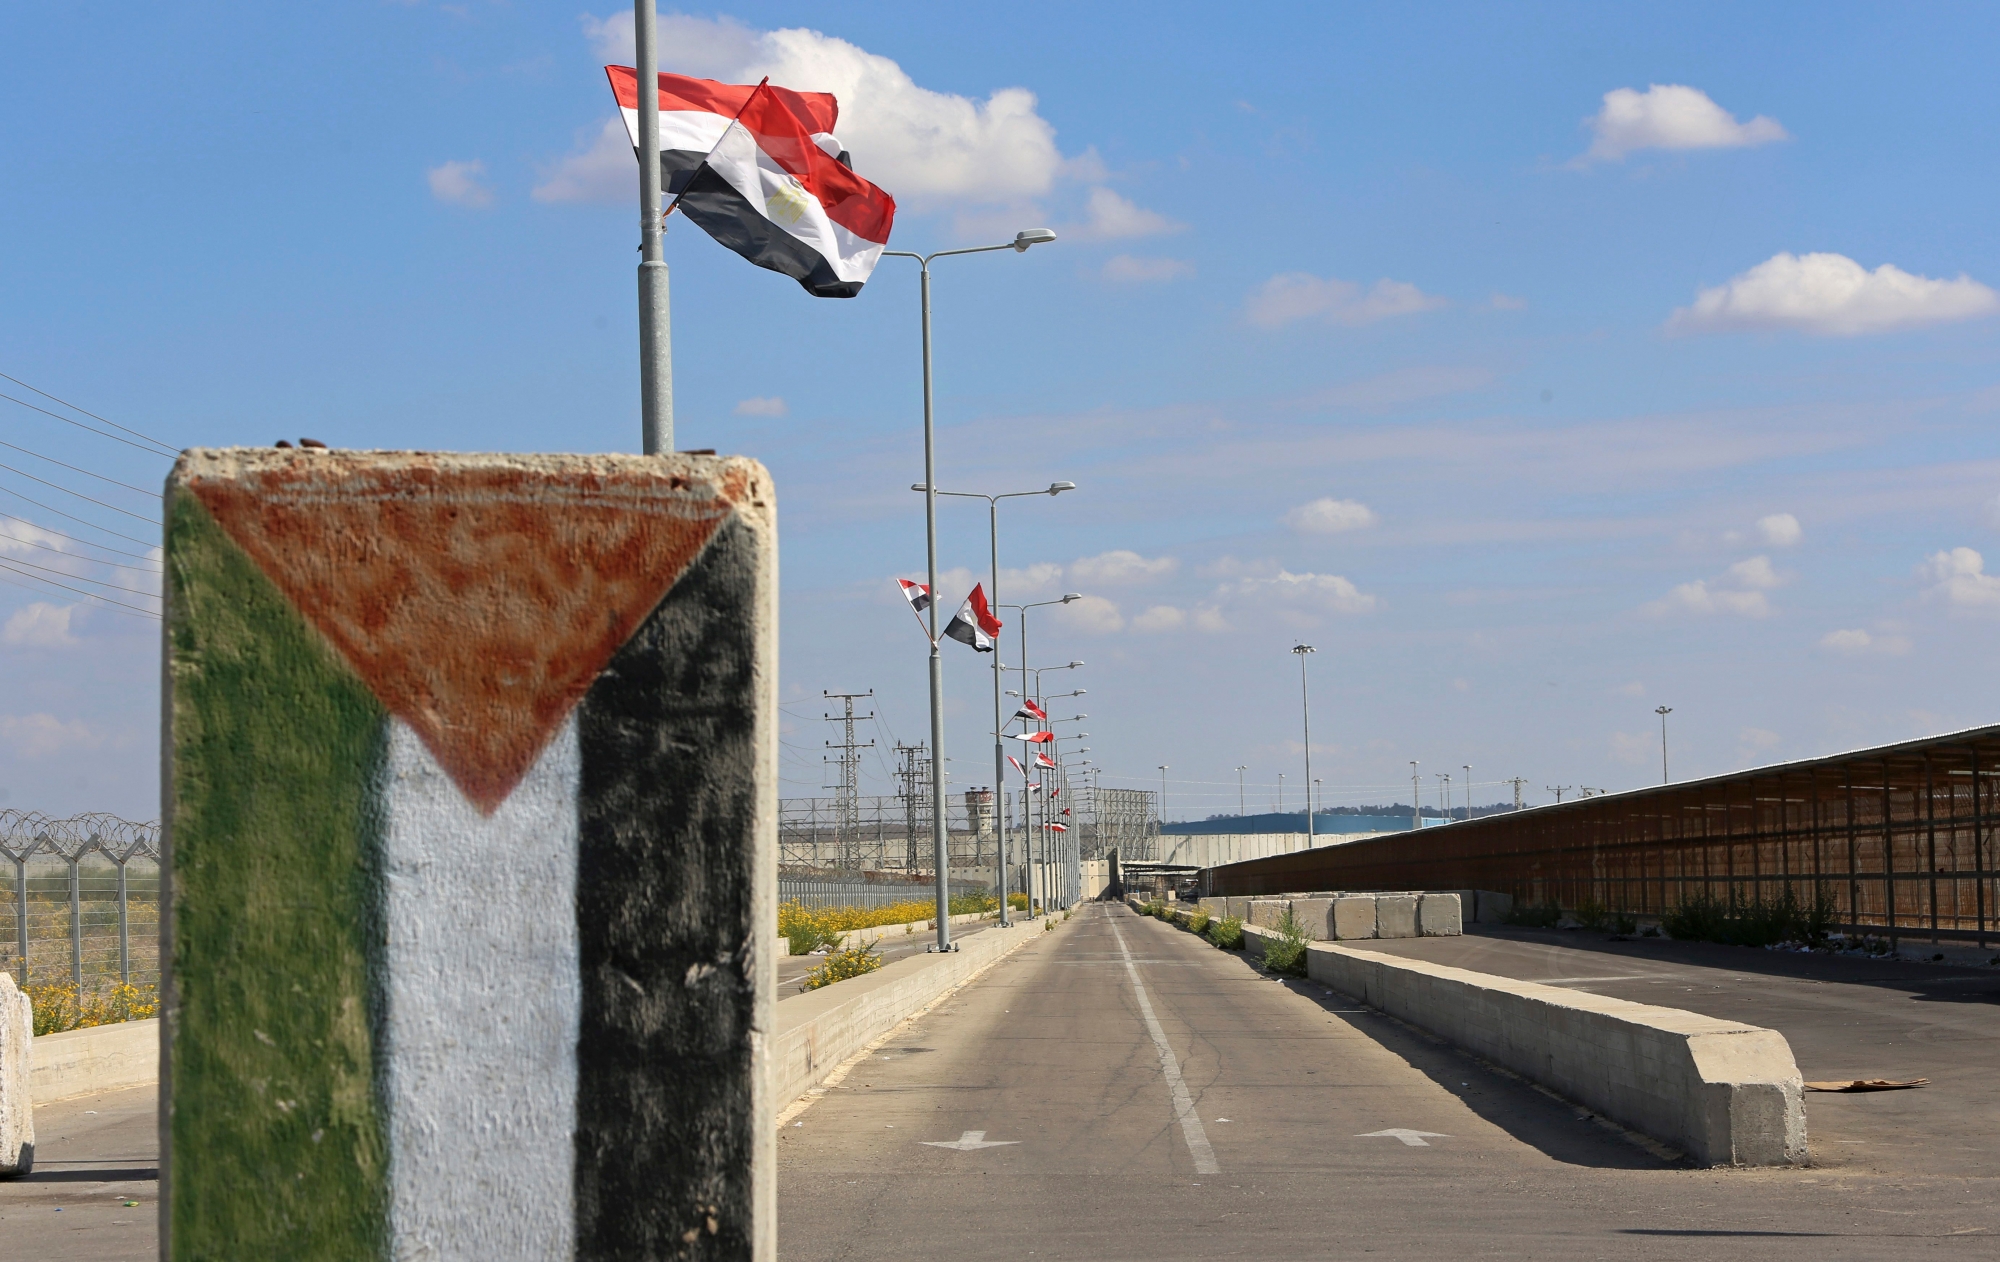 Egyptian flags fly at the passageway leading to Israeli at the Palestinian side of the Erez checkpoint between Israel and Gaza, at Beit Hanoun, Gaza Strip, Wednesday, Nov. 1, 2017. The Islamic militant Hamas group has handed over control of GazaÄôs border crossings with Israel and Egypt to the internationally recognized Palestinian Authority. WednesdayÄôs handover was the first tangible step in implementing a reconciliation deal between Hamas and the rival Fatah party, which controls the Palestinian Authority. (AP Photo/Adel Hana) Palestinians Reconciliation